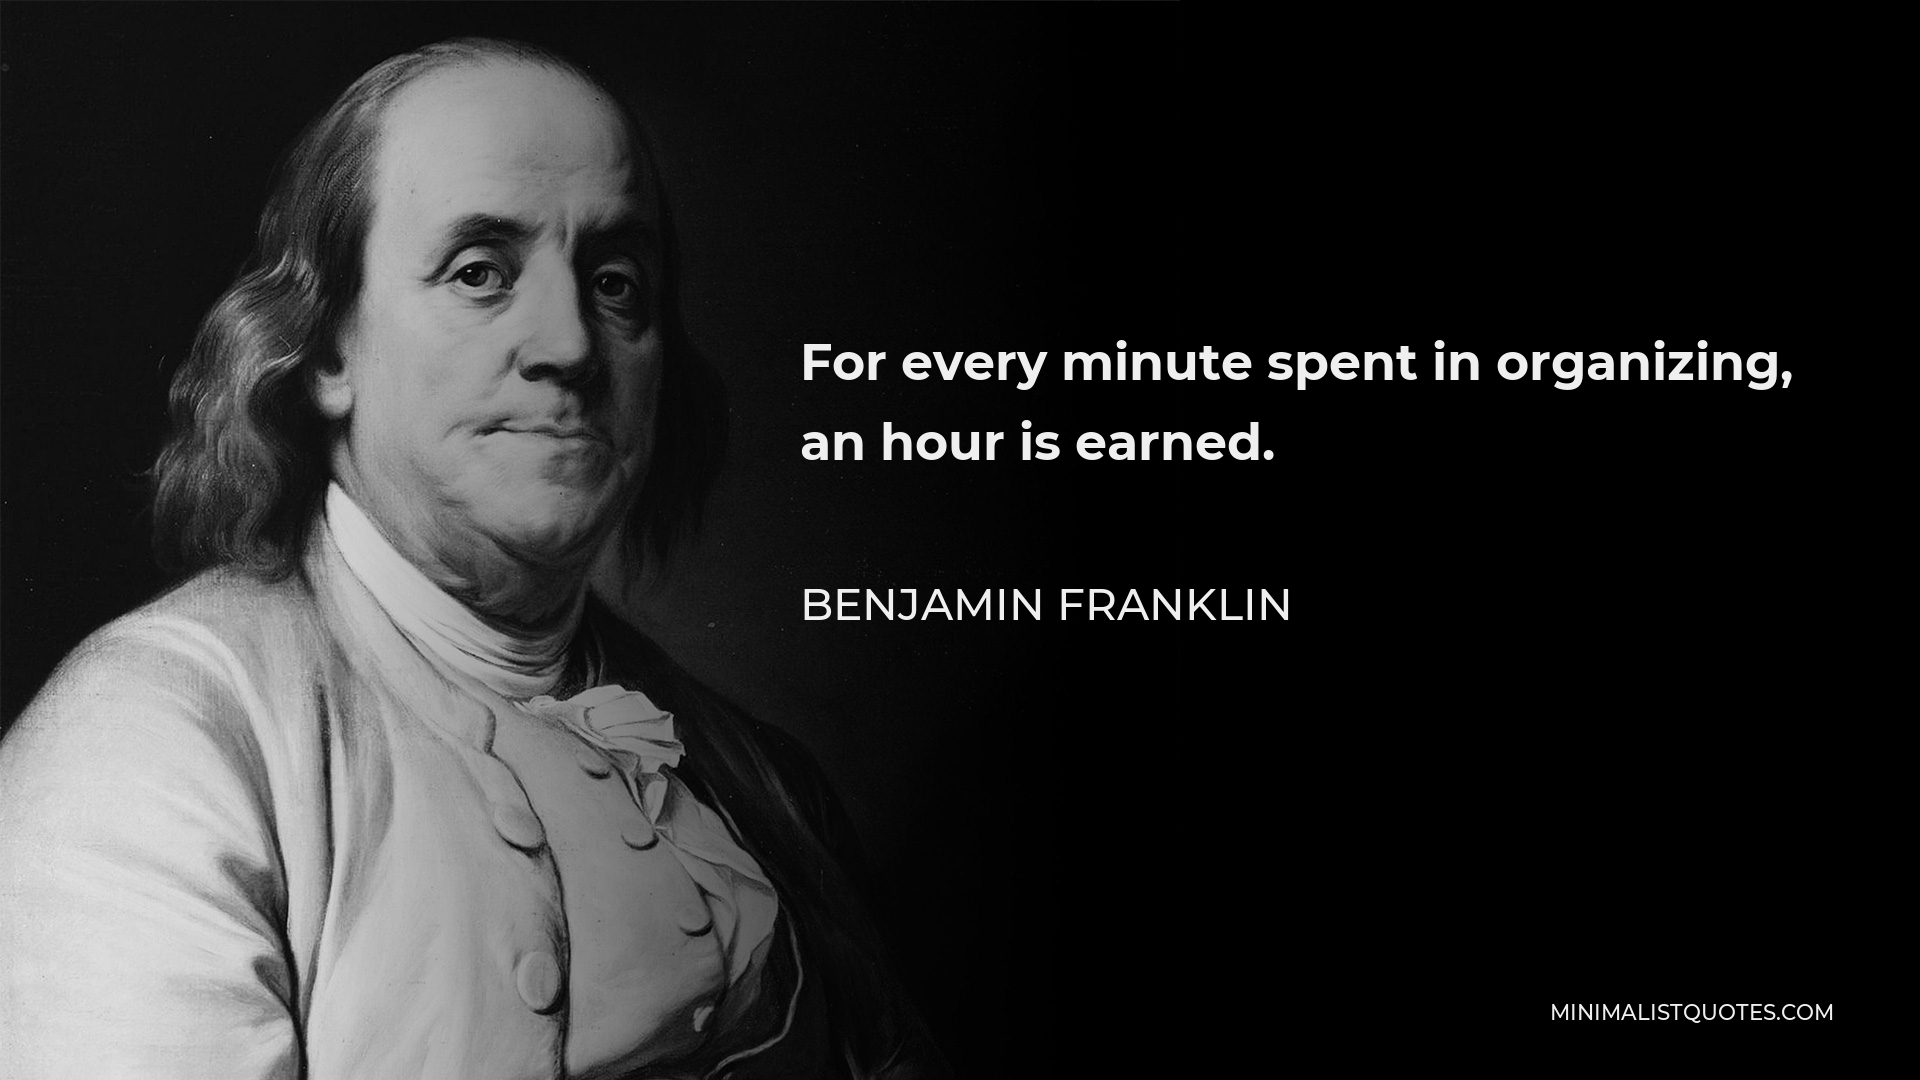 Benjamin Franklin Quote - For every minute spent in organizing, an hour is earned.